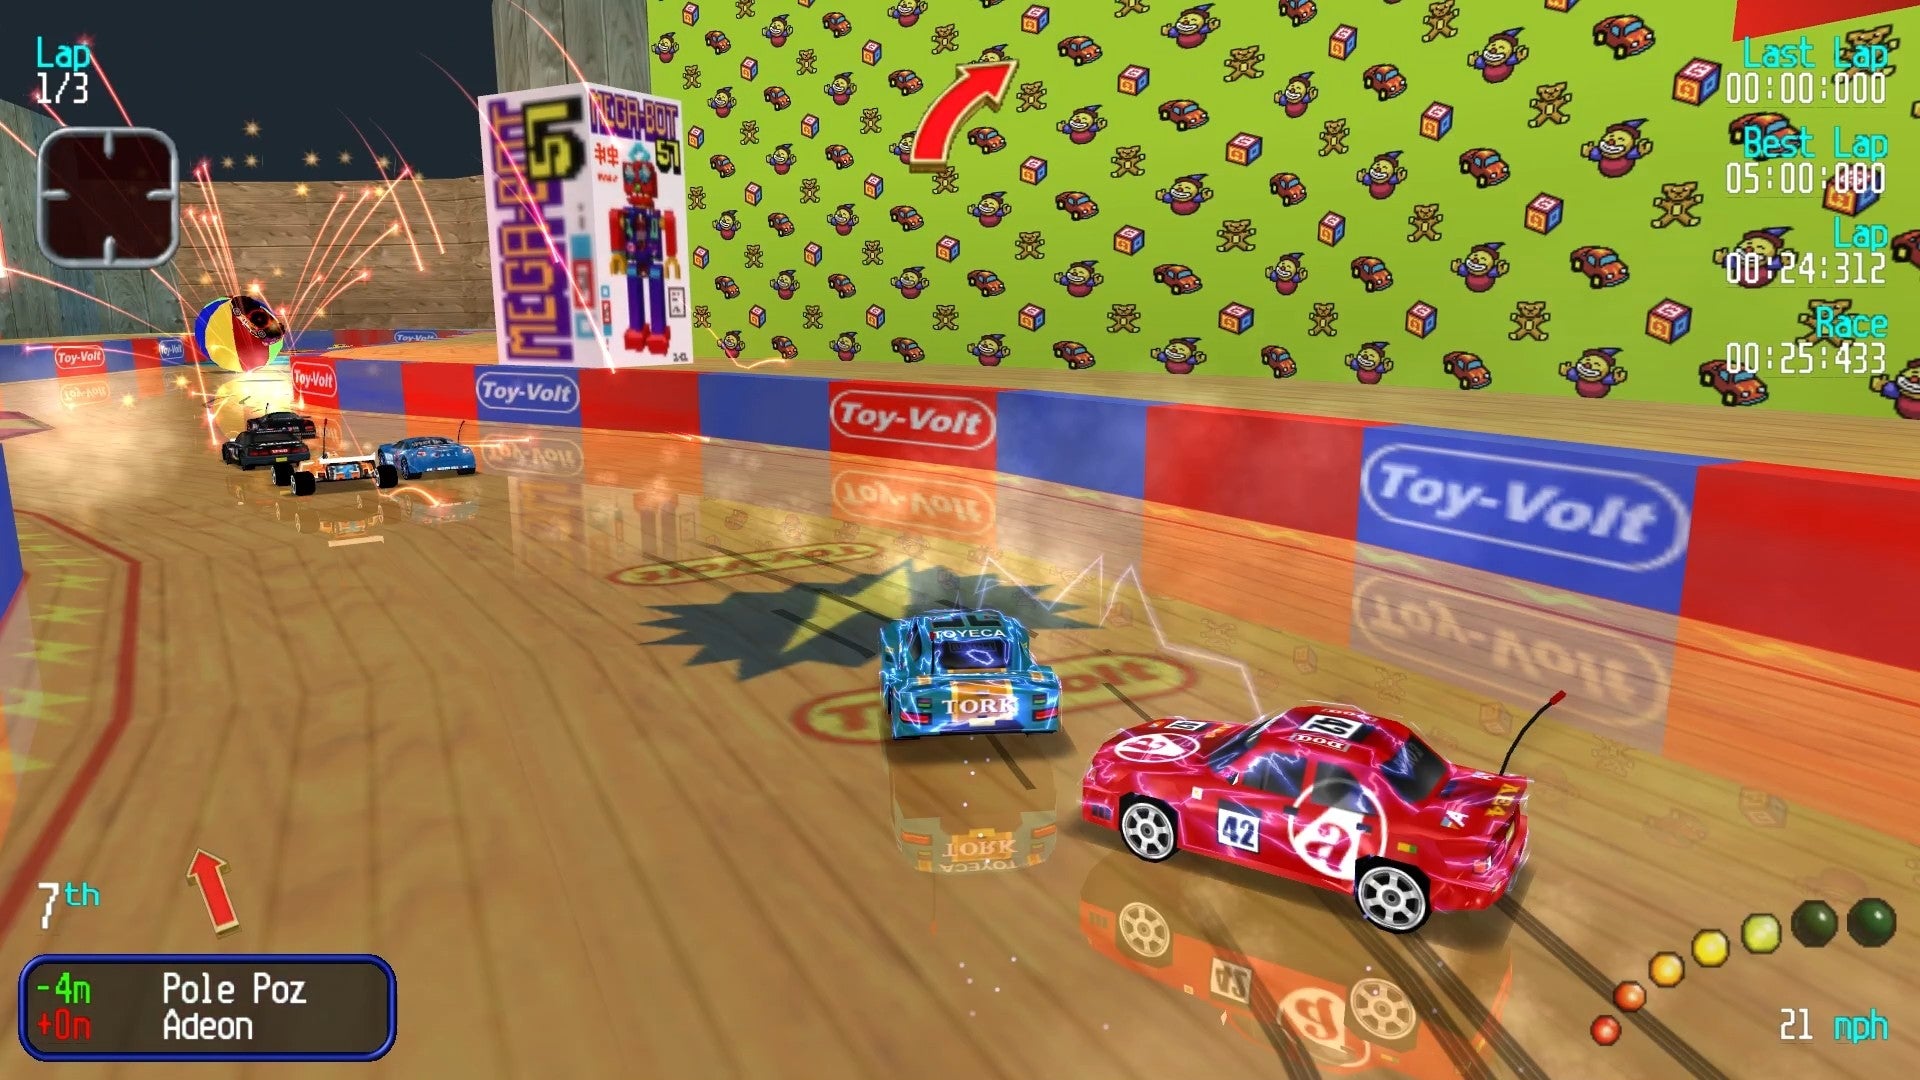 Remote control cars swerve around a toy store in Re-Volt.